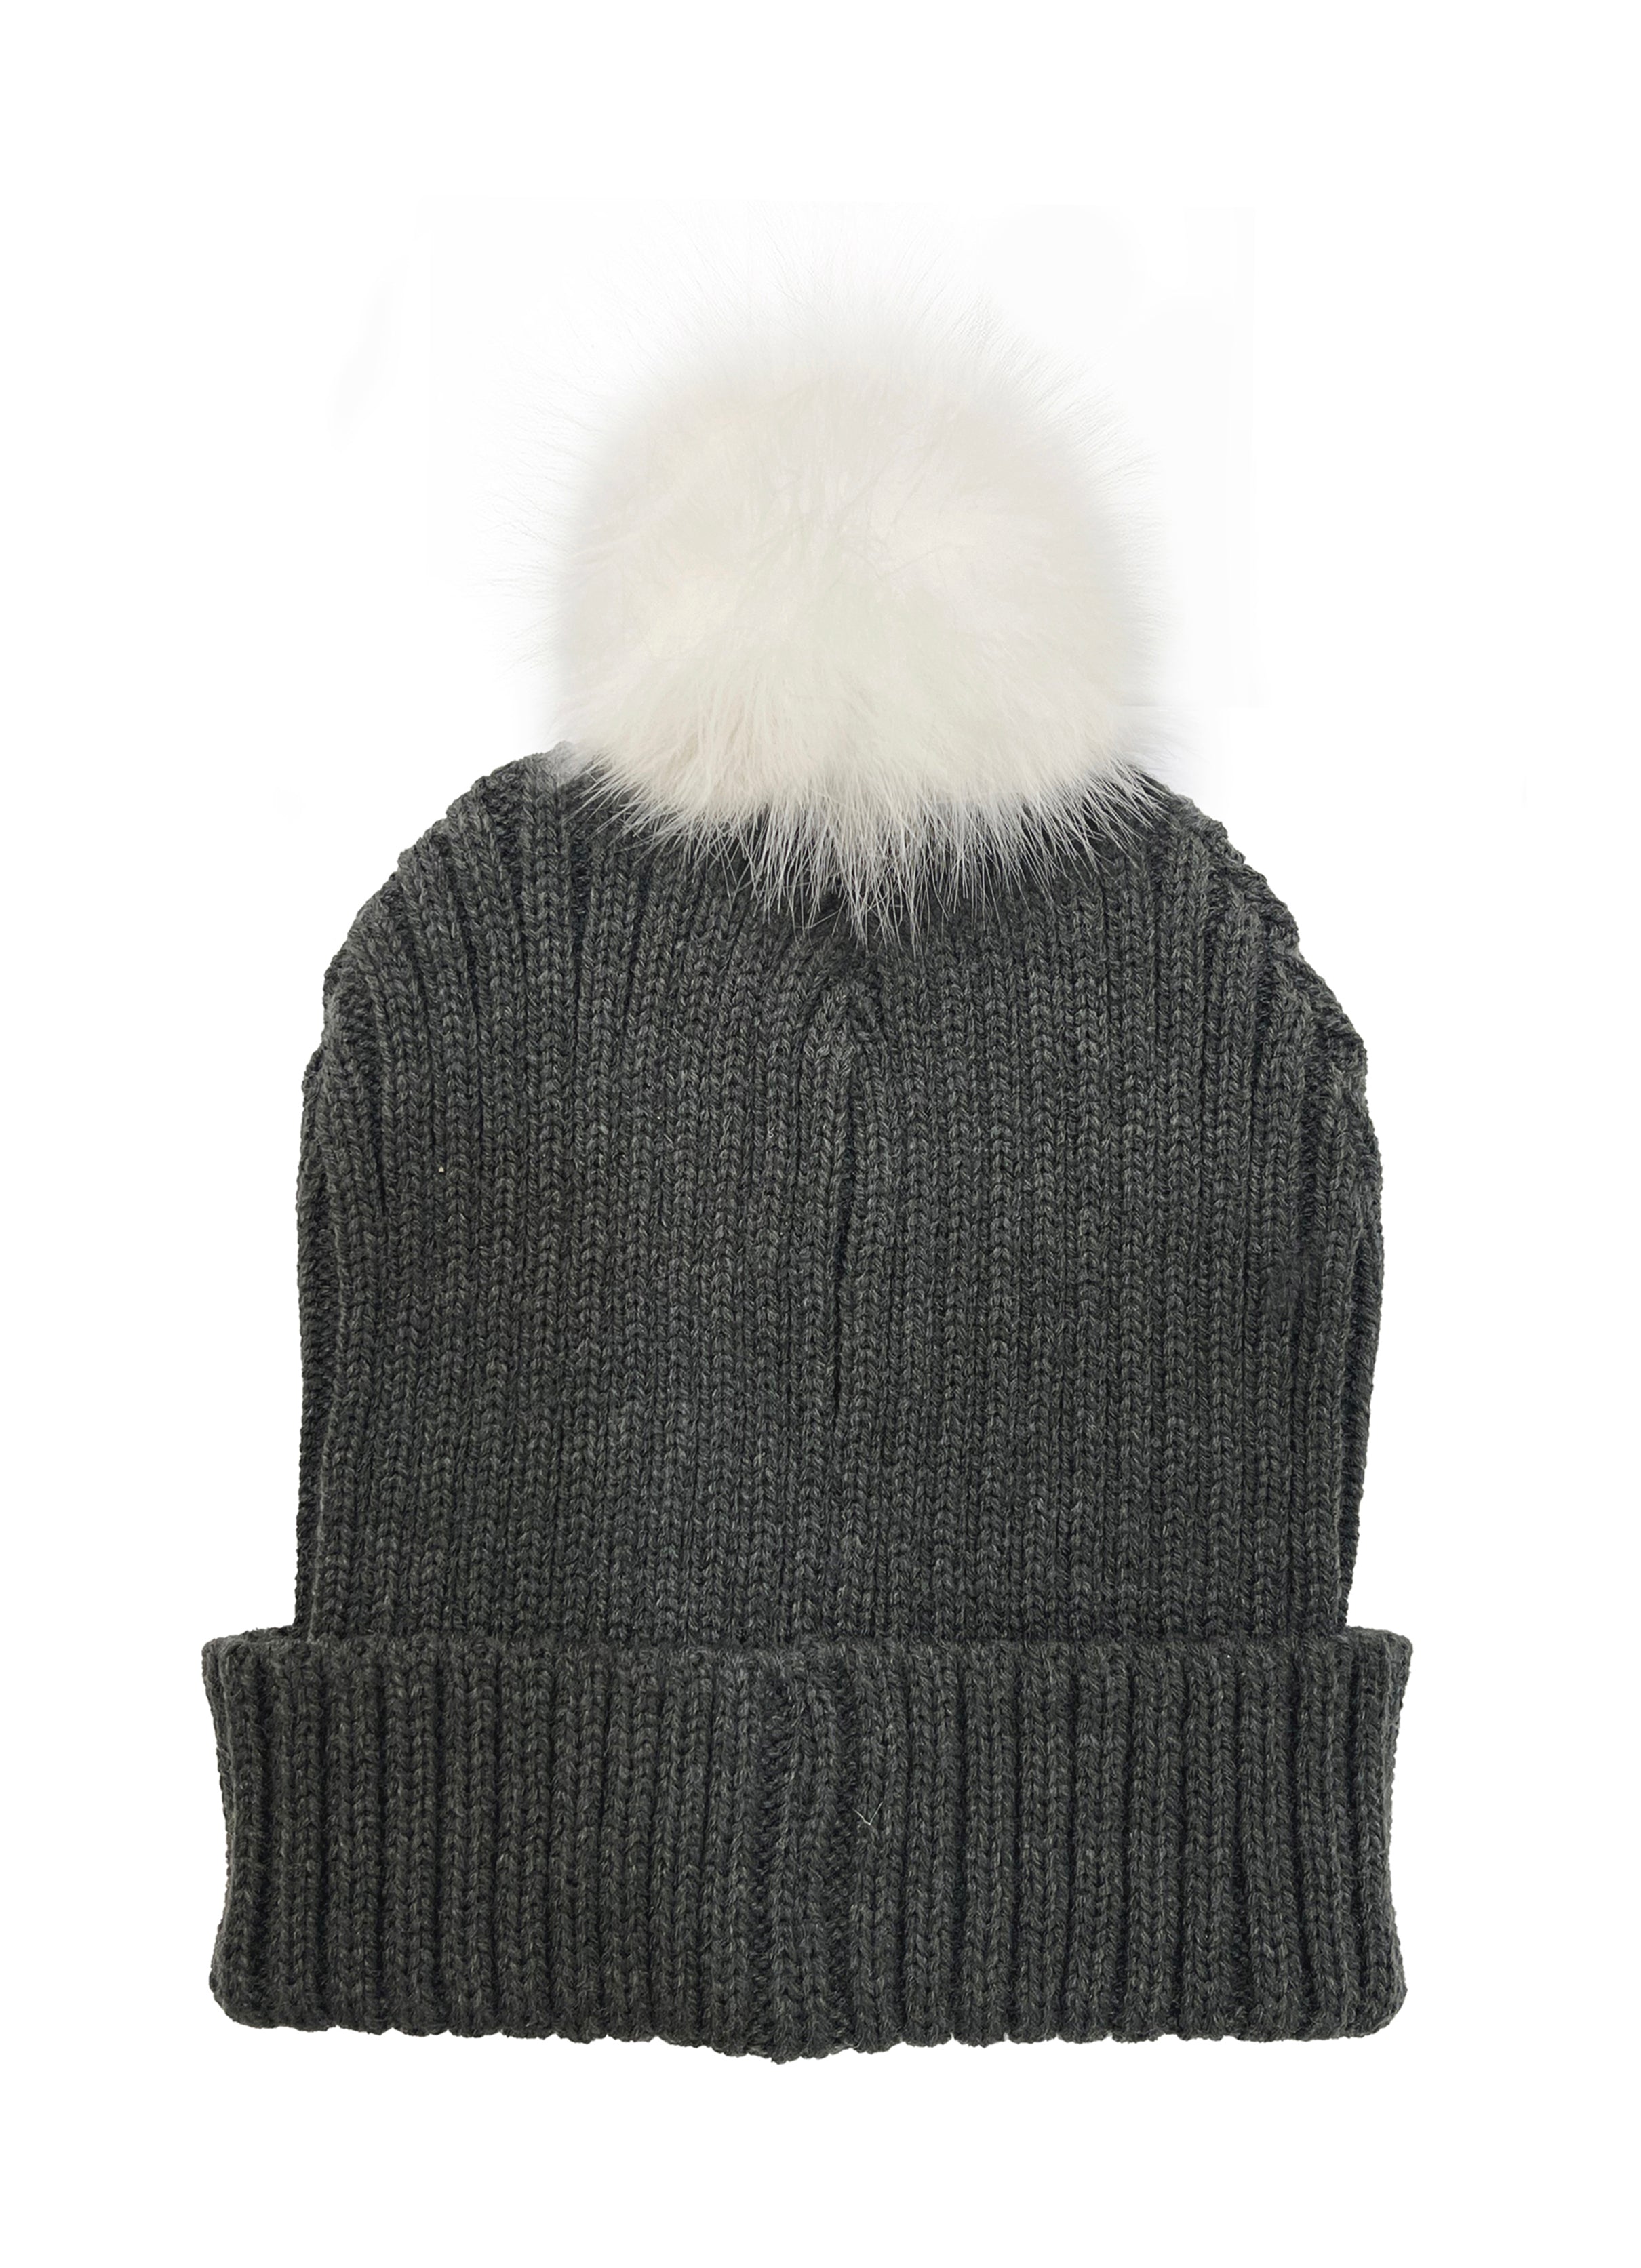 The Pom Hat - Charcoal/White